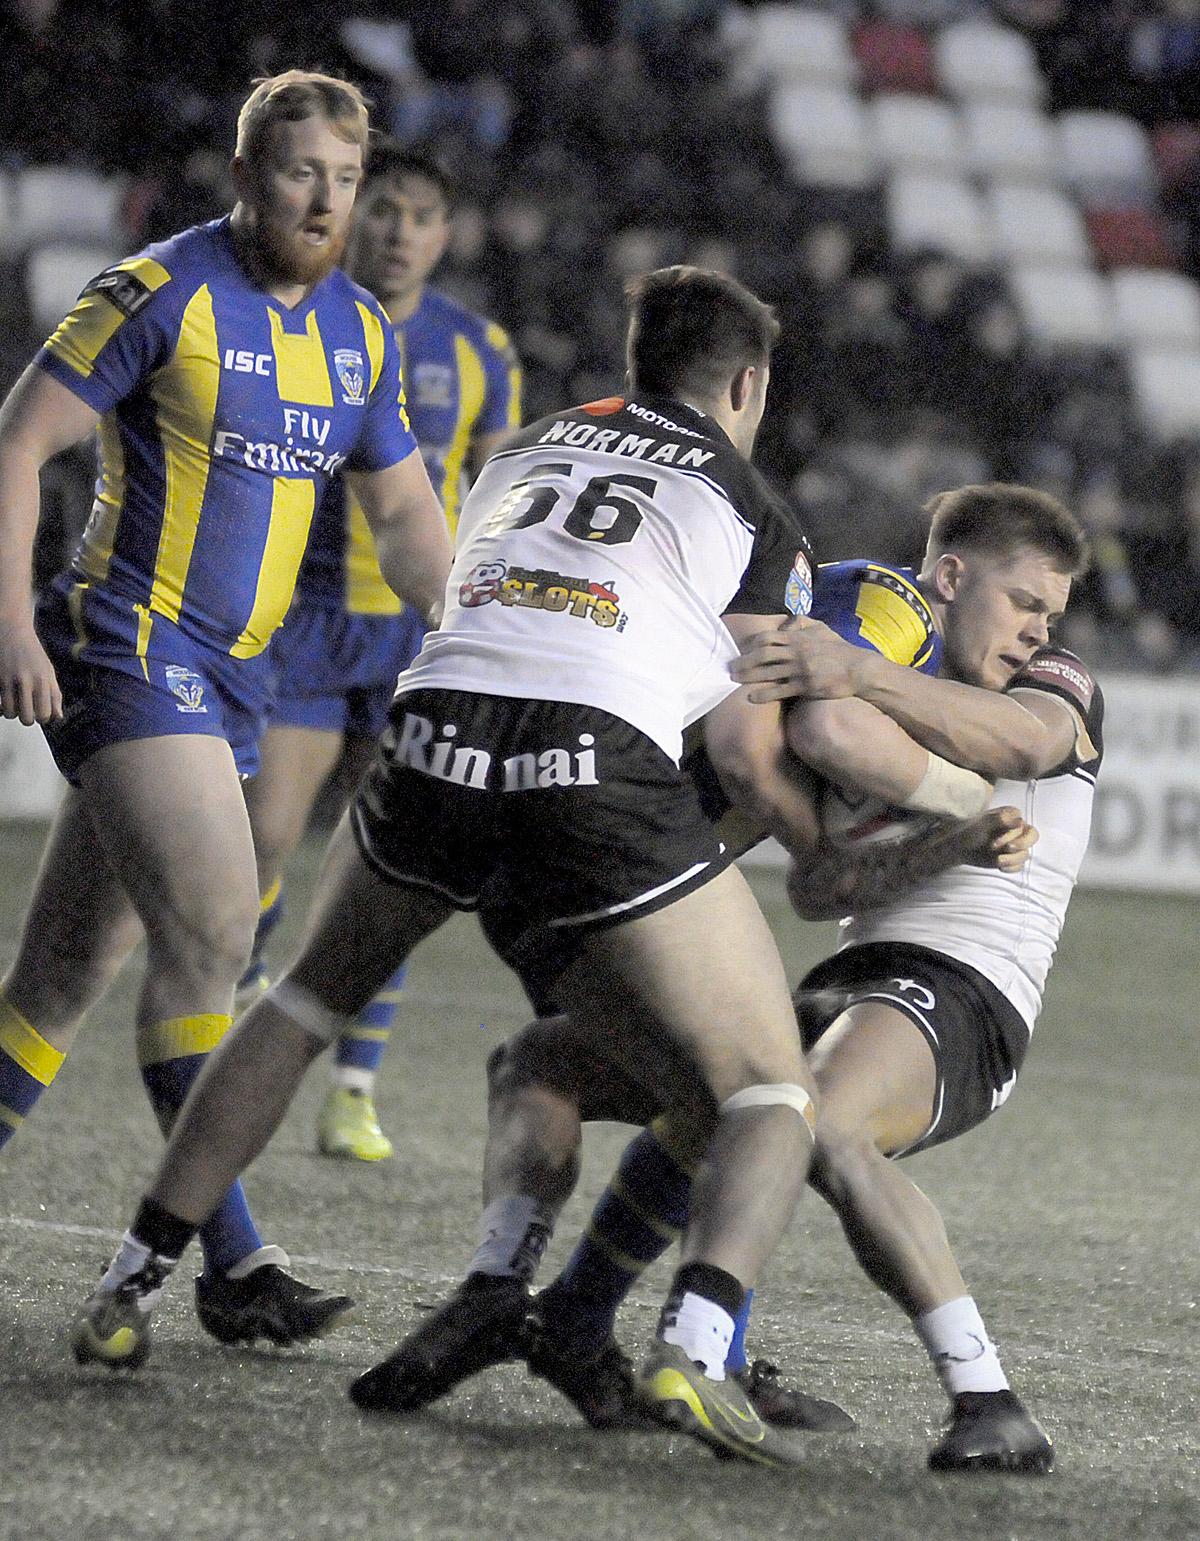 Re-live the action from Wolves' festive friendly at Widnes. Pictures by Mike Boden